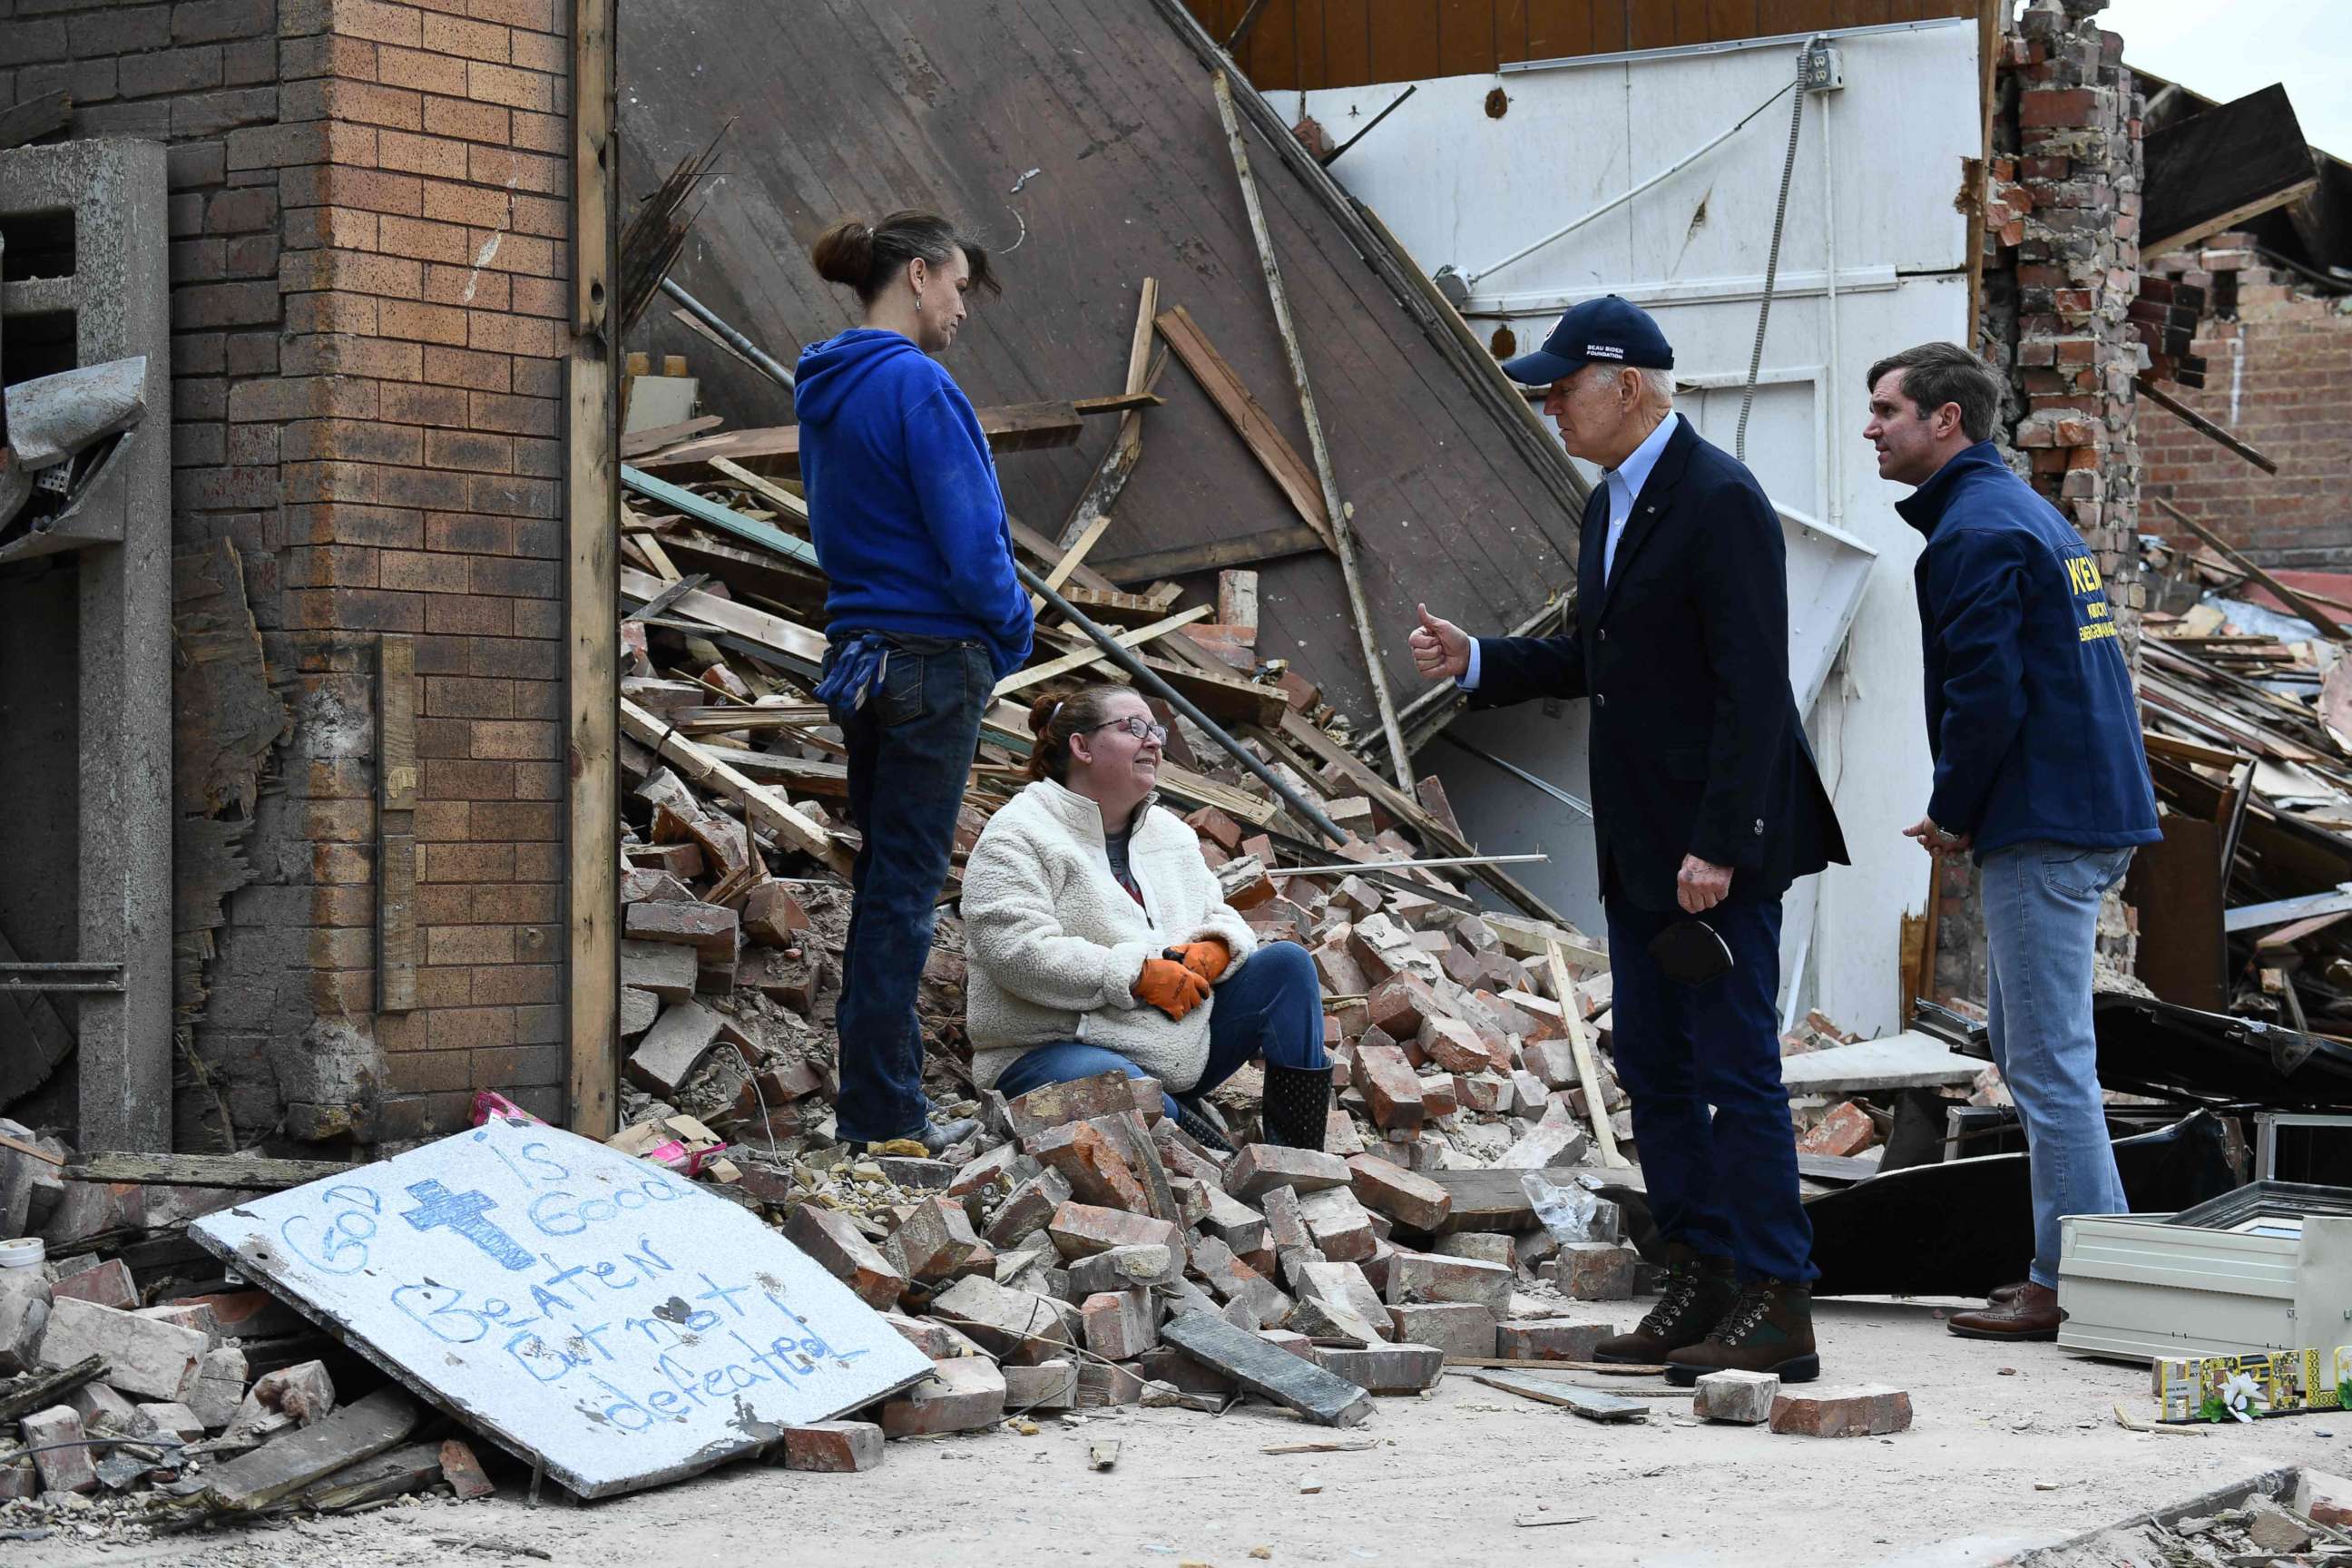 PHOTO: President Joe Biden speaks with a resident as he tours storm damage in Mayfield, Ky., on Dec. 15, 2021.